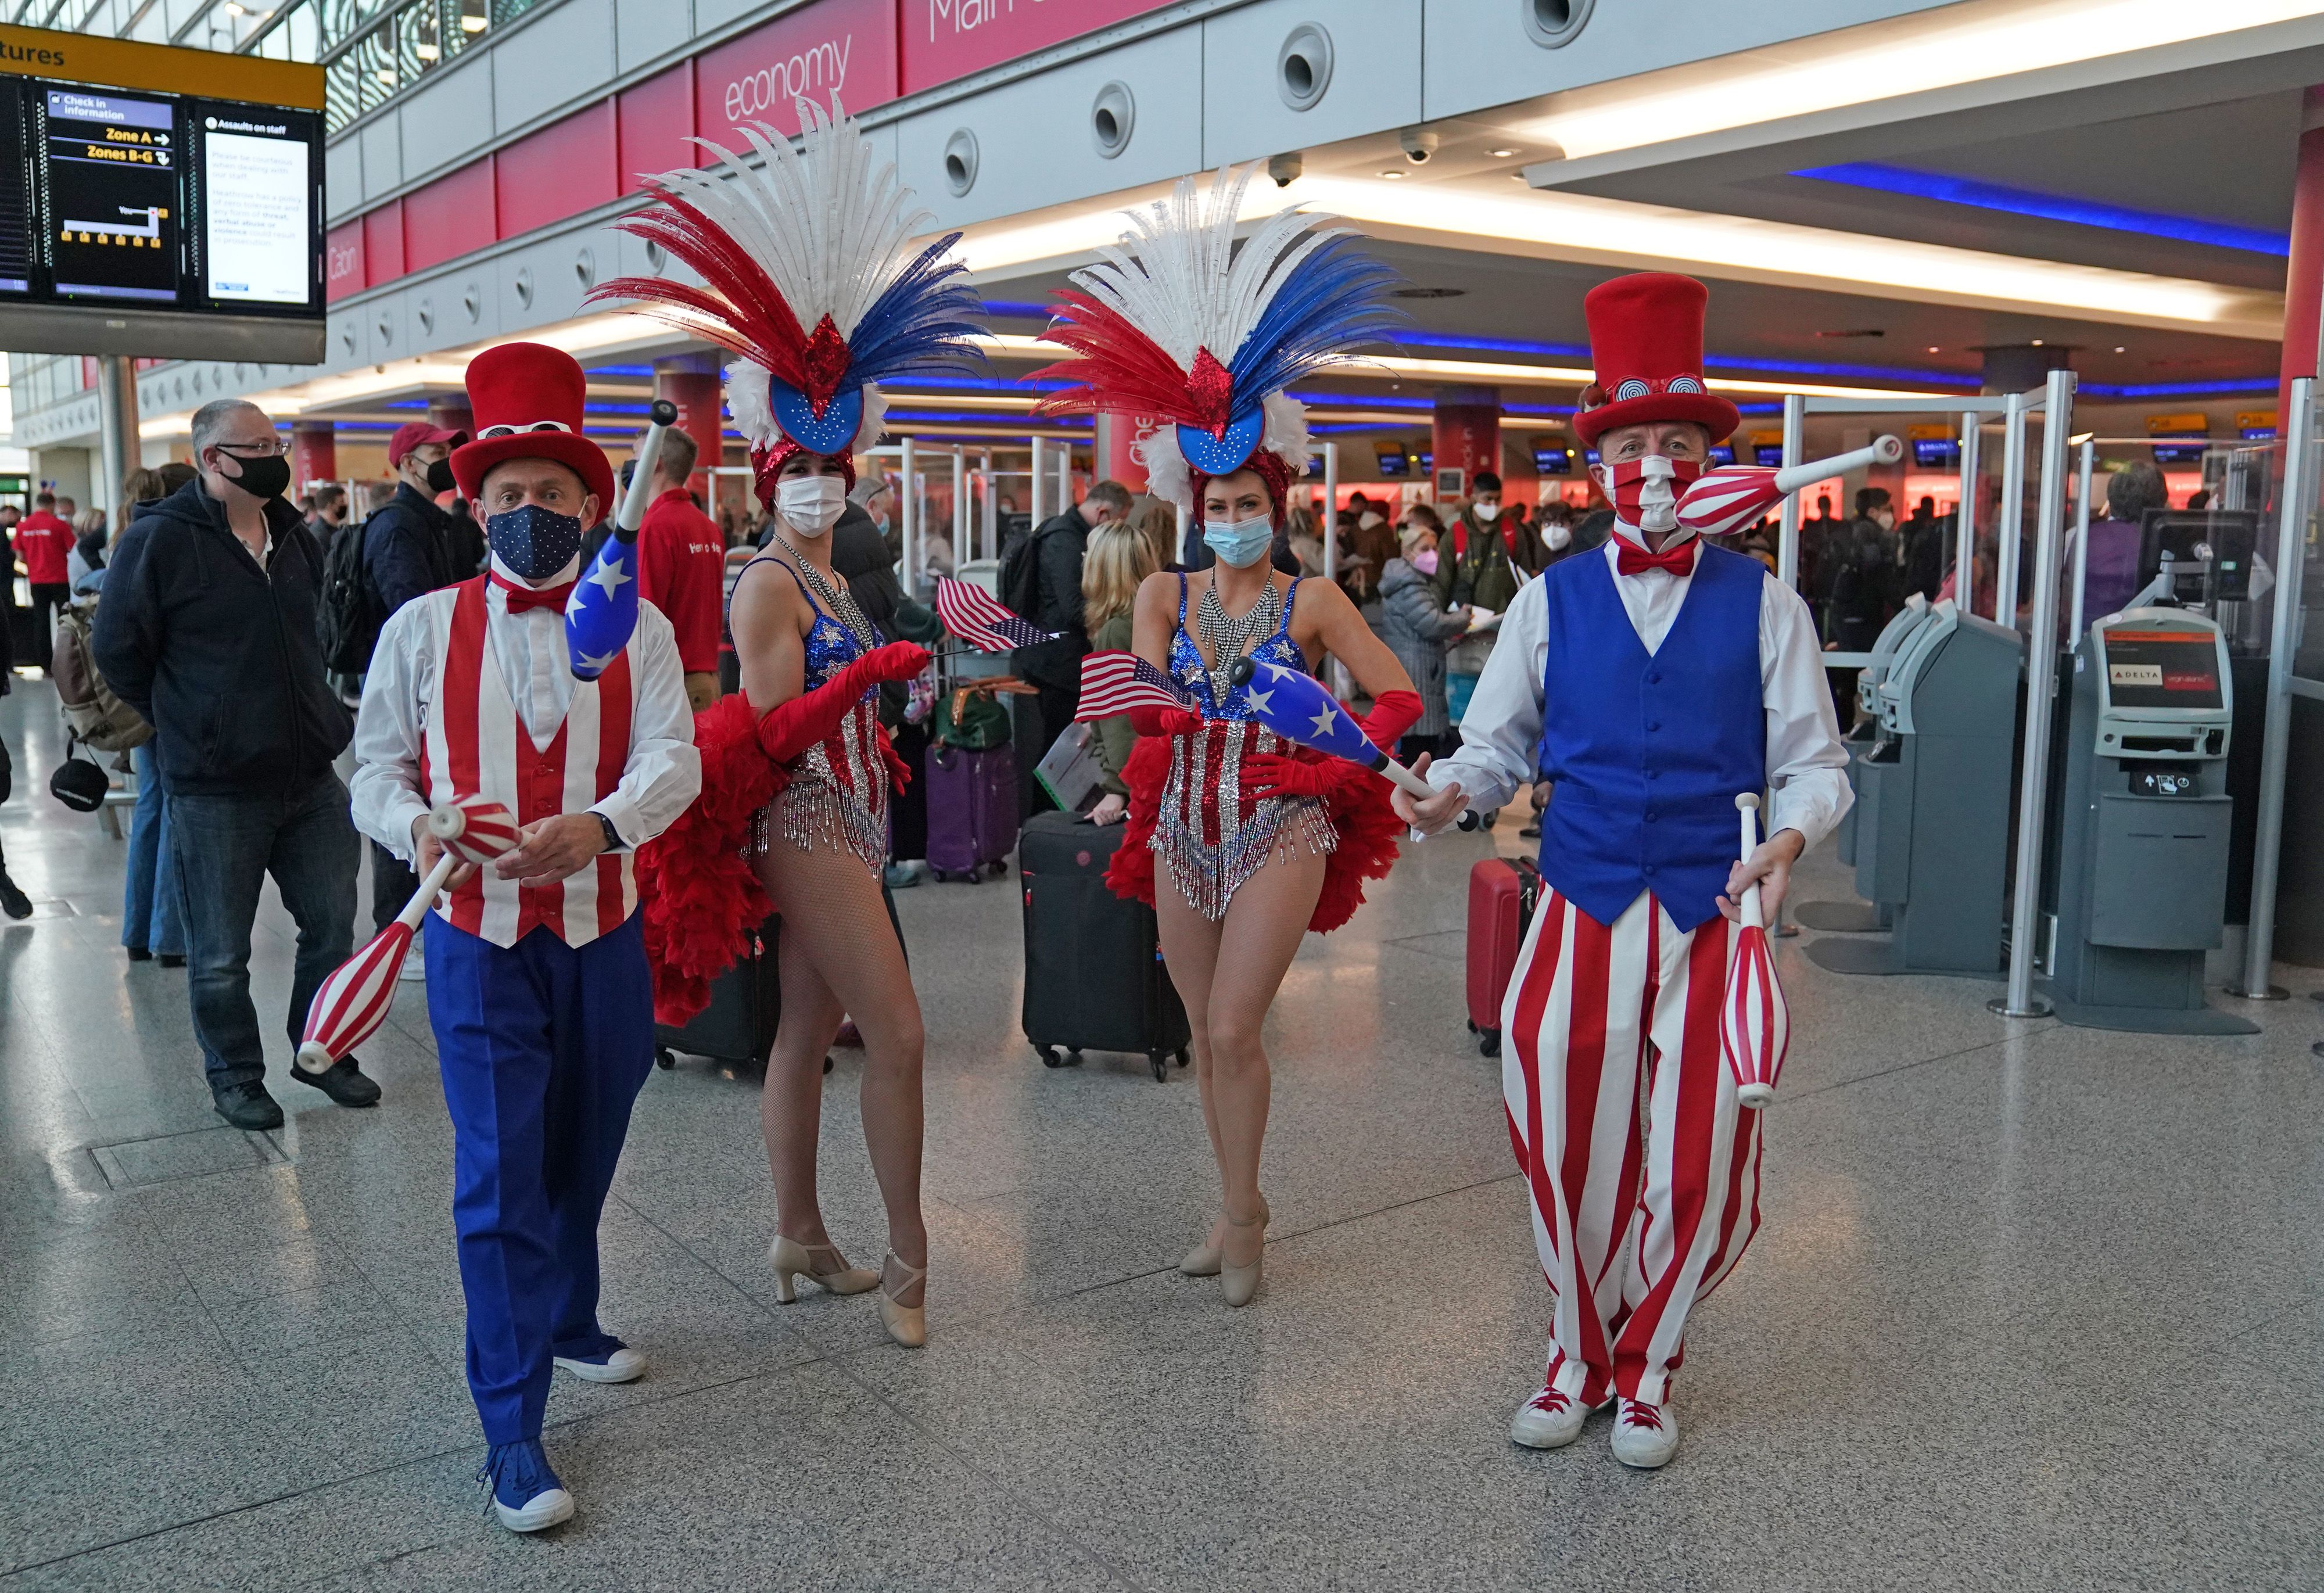  Performers entertain passengers at London Heathrow Airport's T3 as the US reopens its borders to UK visitors on Nov. 8